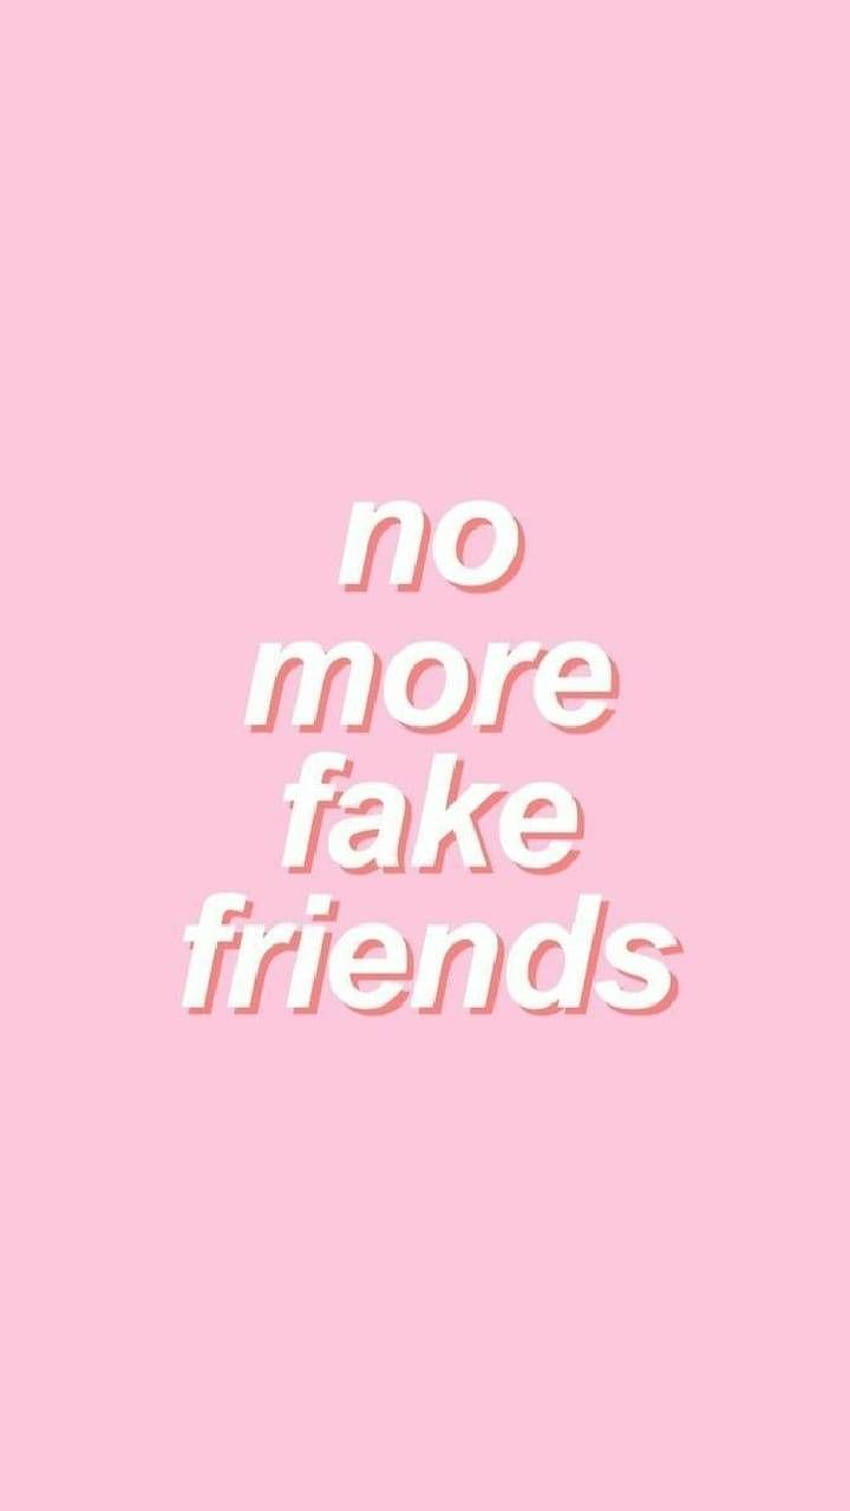 28 Fake Friends Quotes Images for Facebook Quotes about Bad Friends